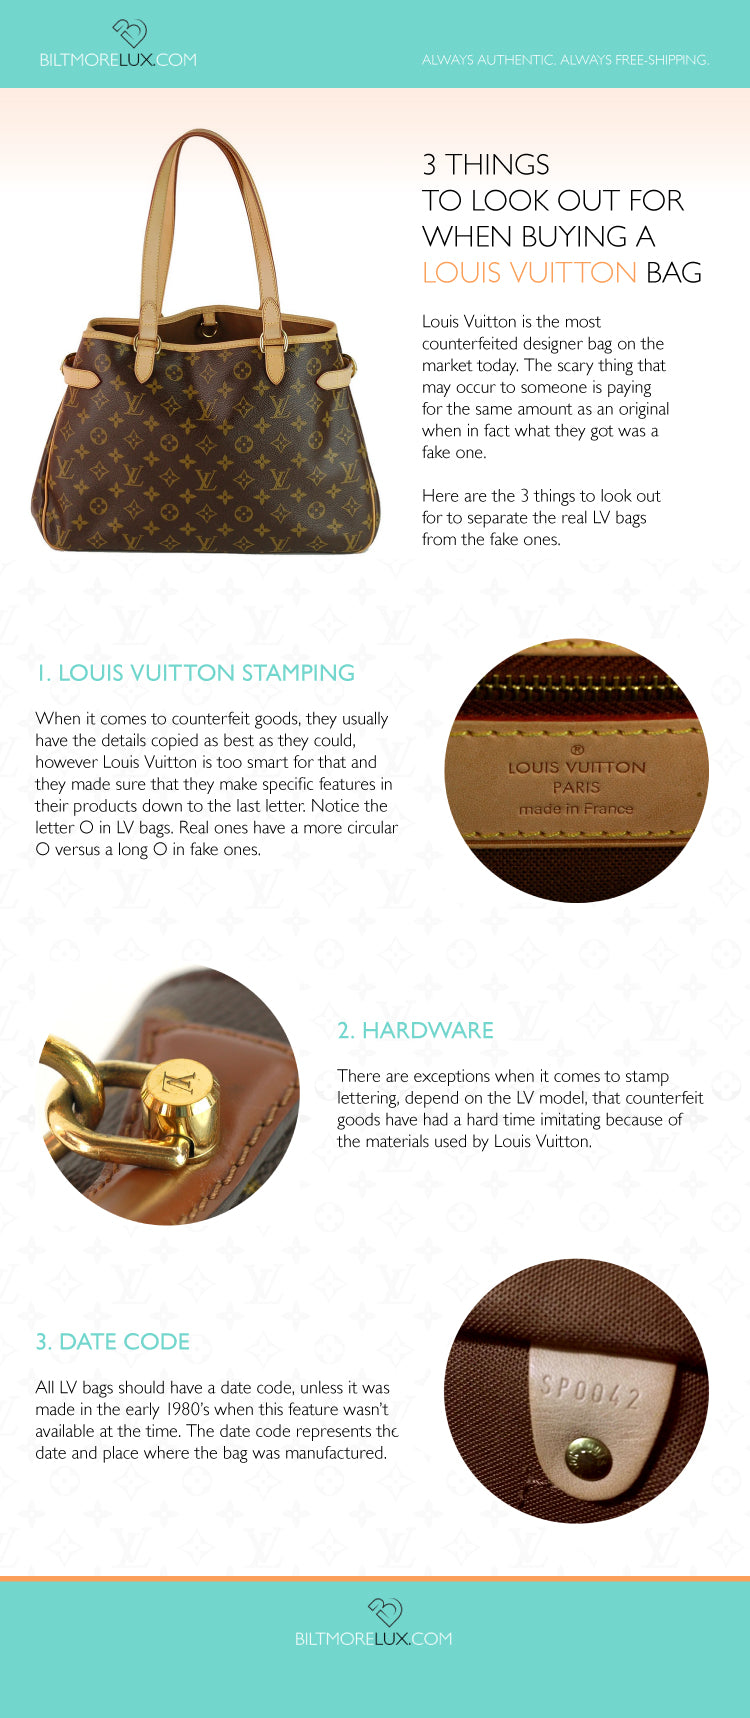 Can I buy a Louis Vuitton bag on the French site and ship it to